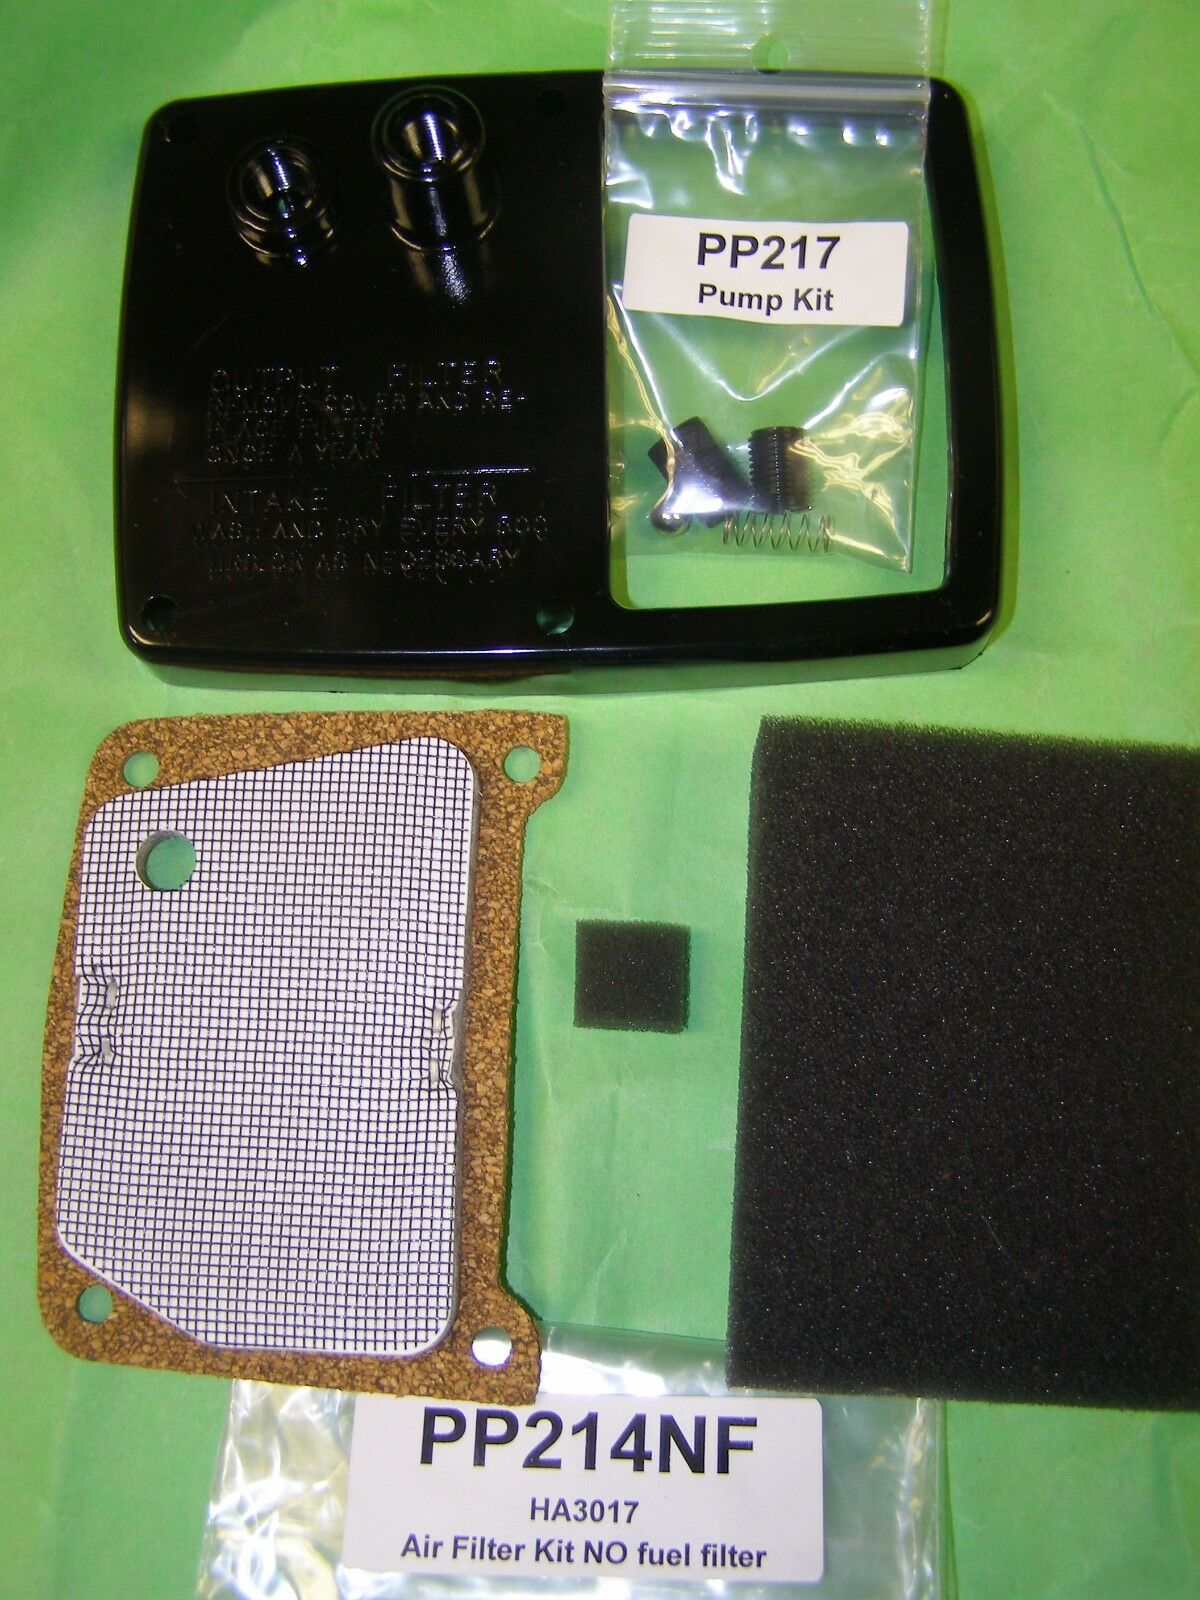 M16545ff Pump End Cover W/free Pump Kit And Free Pp214nf Filter Kit